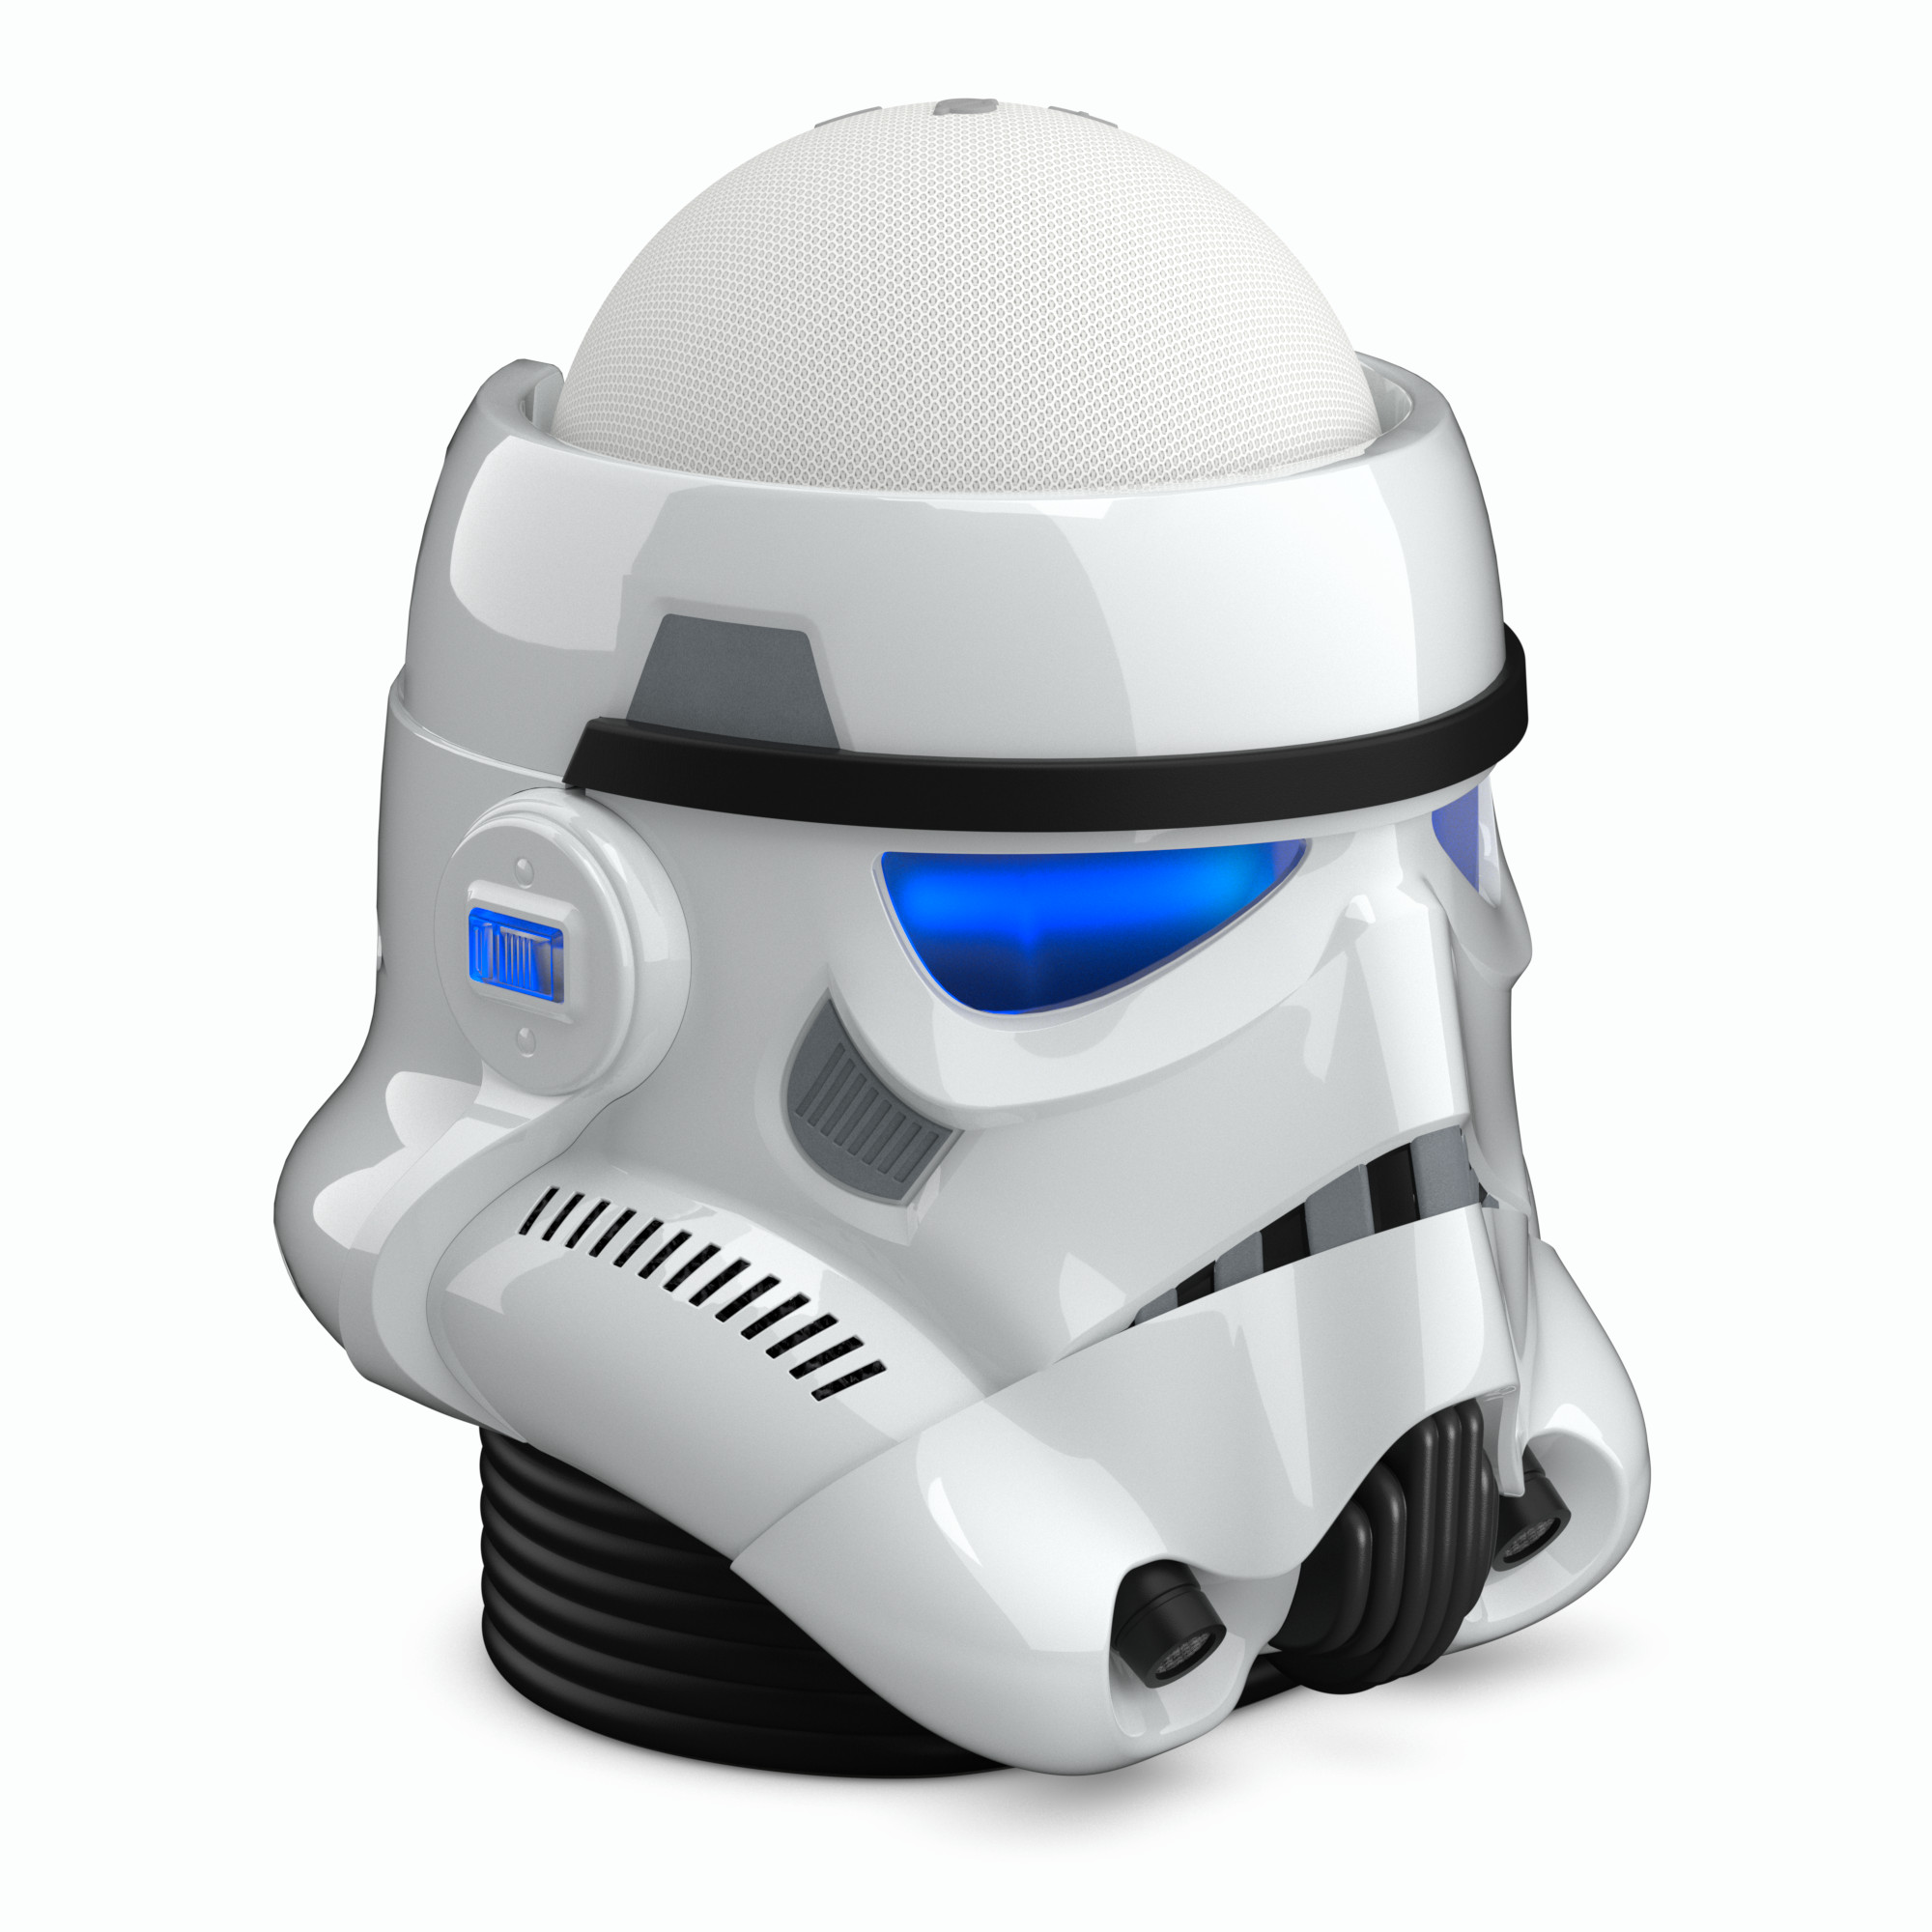 Product render of Stormtrooper Helmet with Echo Dot. Lighting, compositing, and material creation were made in Cinema4D